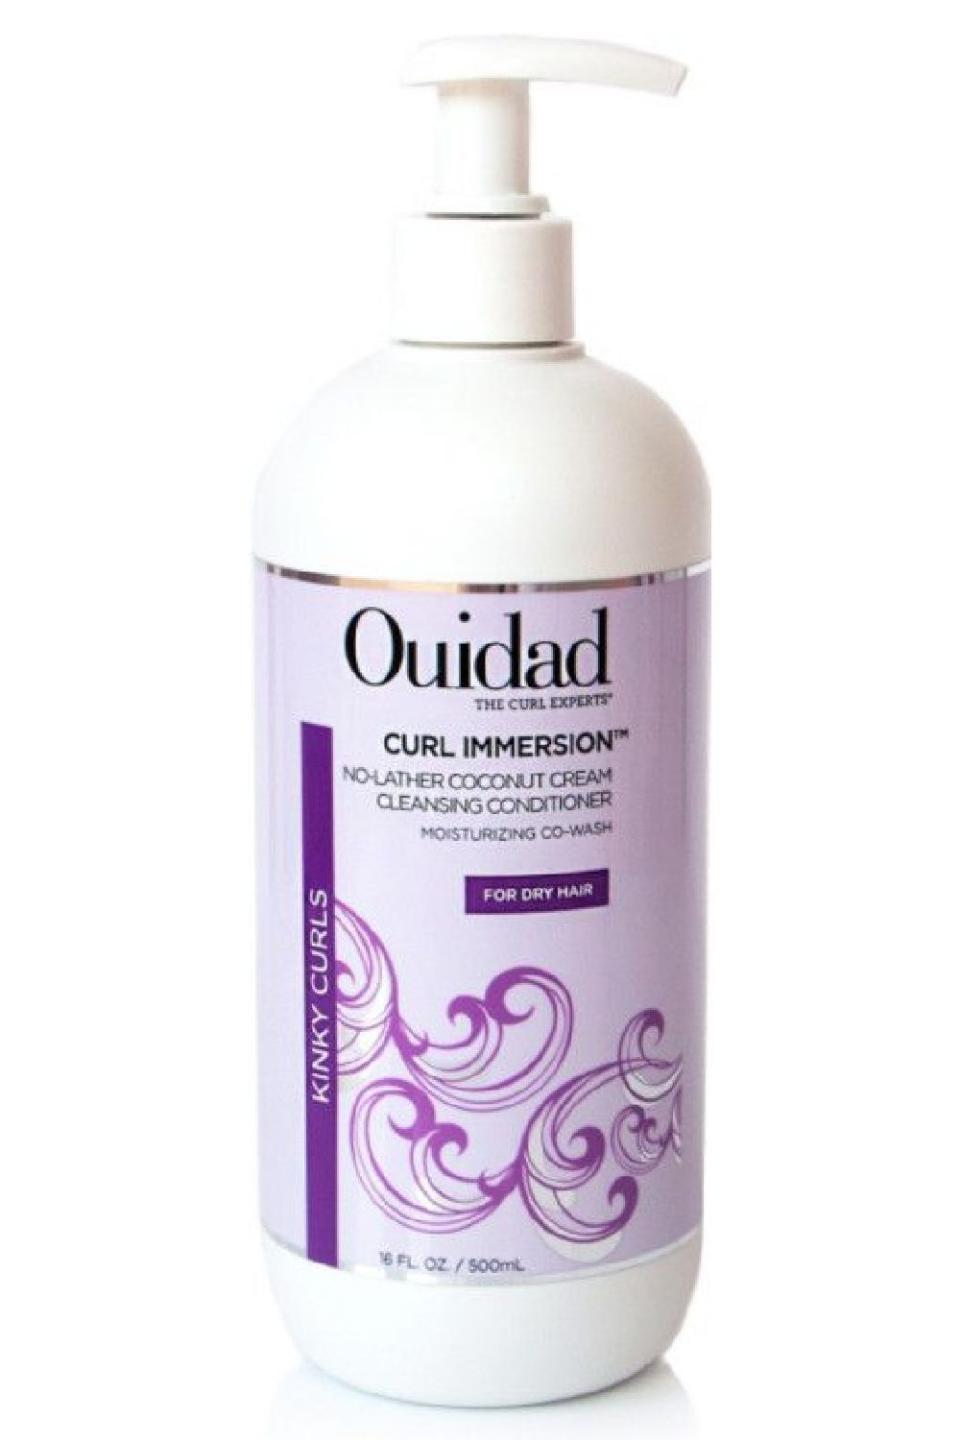 13) Ouidad Curl Immersion No-Lather Coconut Cream Cleansing Conditioner